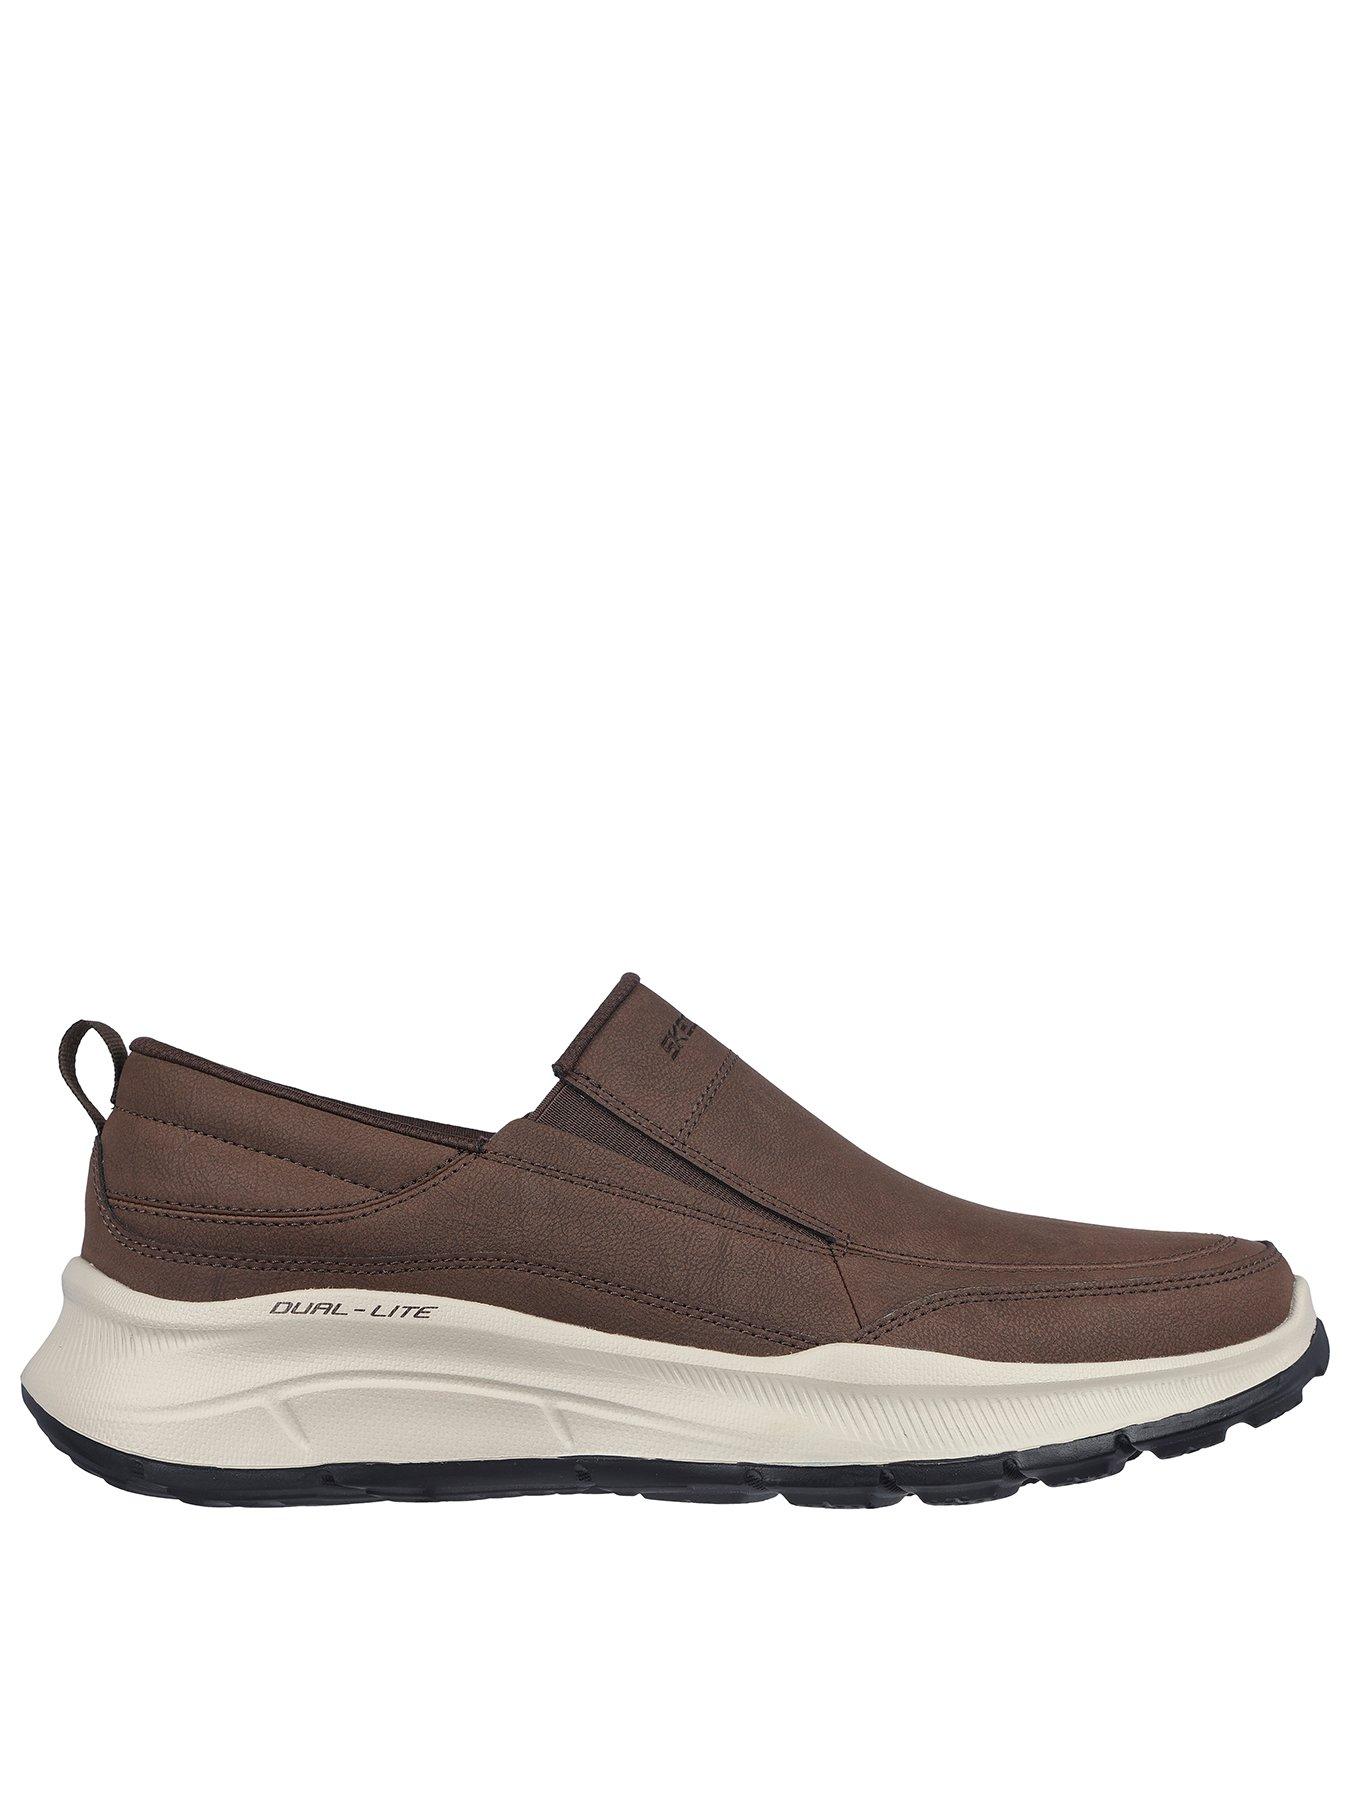 Skechers Equalizer 5.0 Relaxed Fit Memory Foam Trainers - Brown | very.co.uk